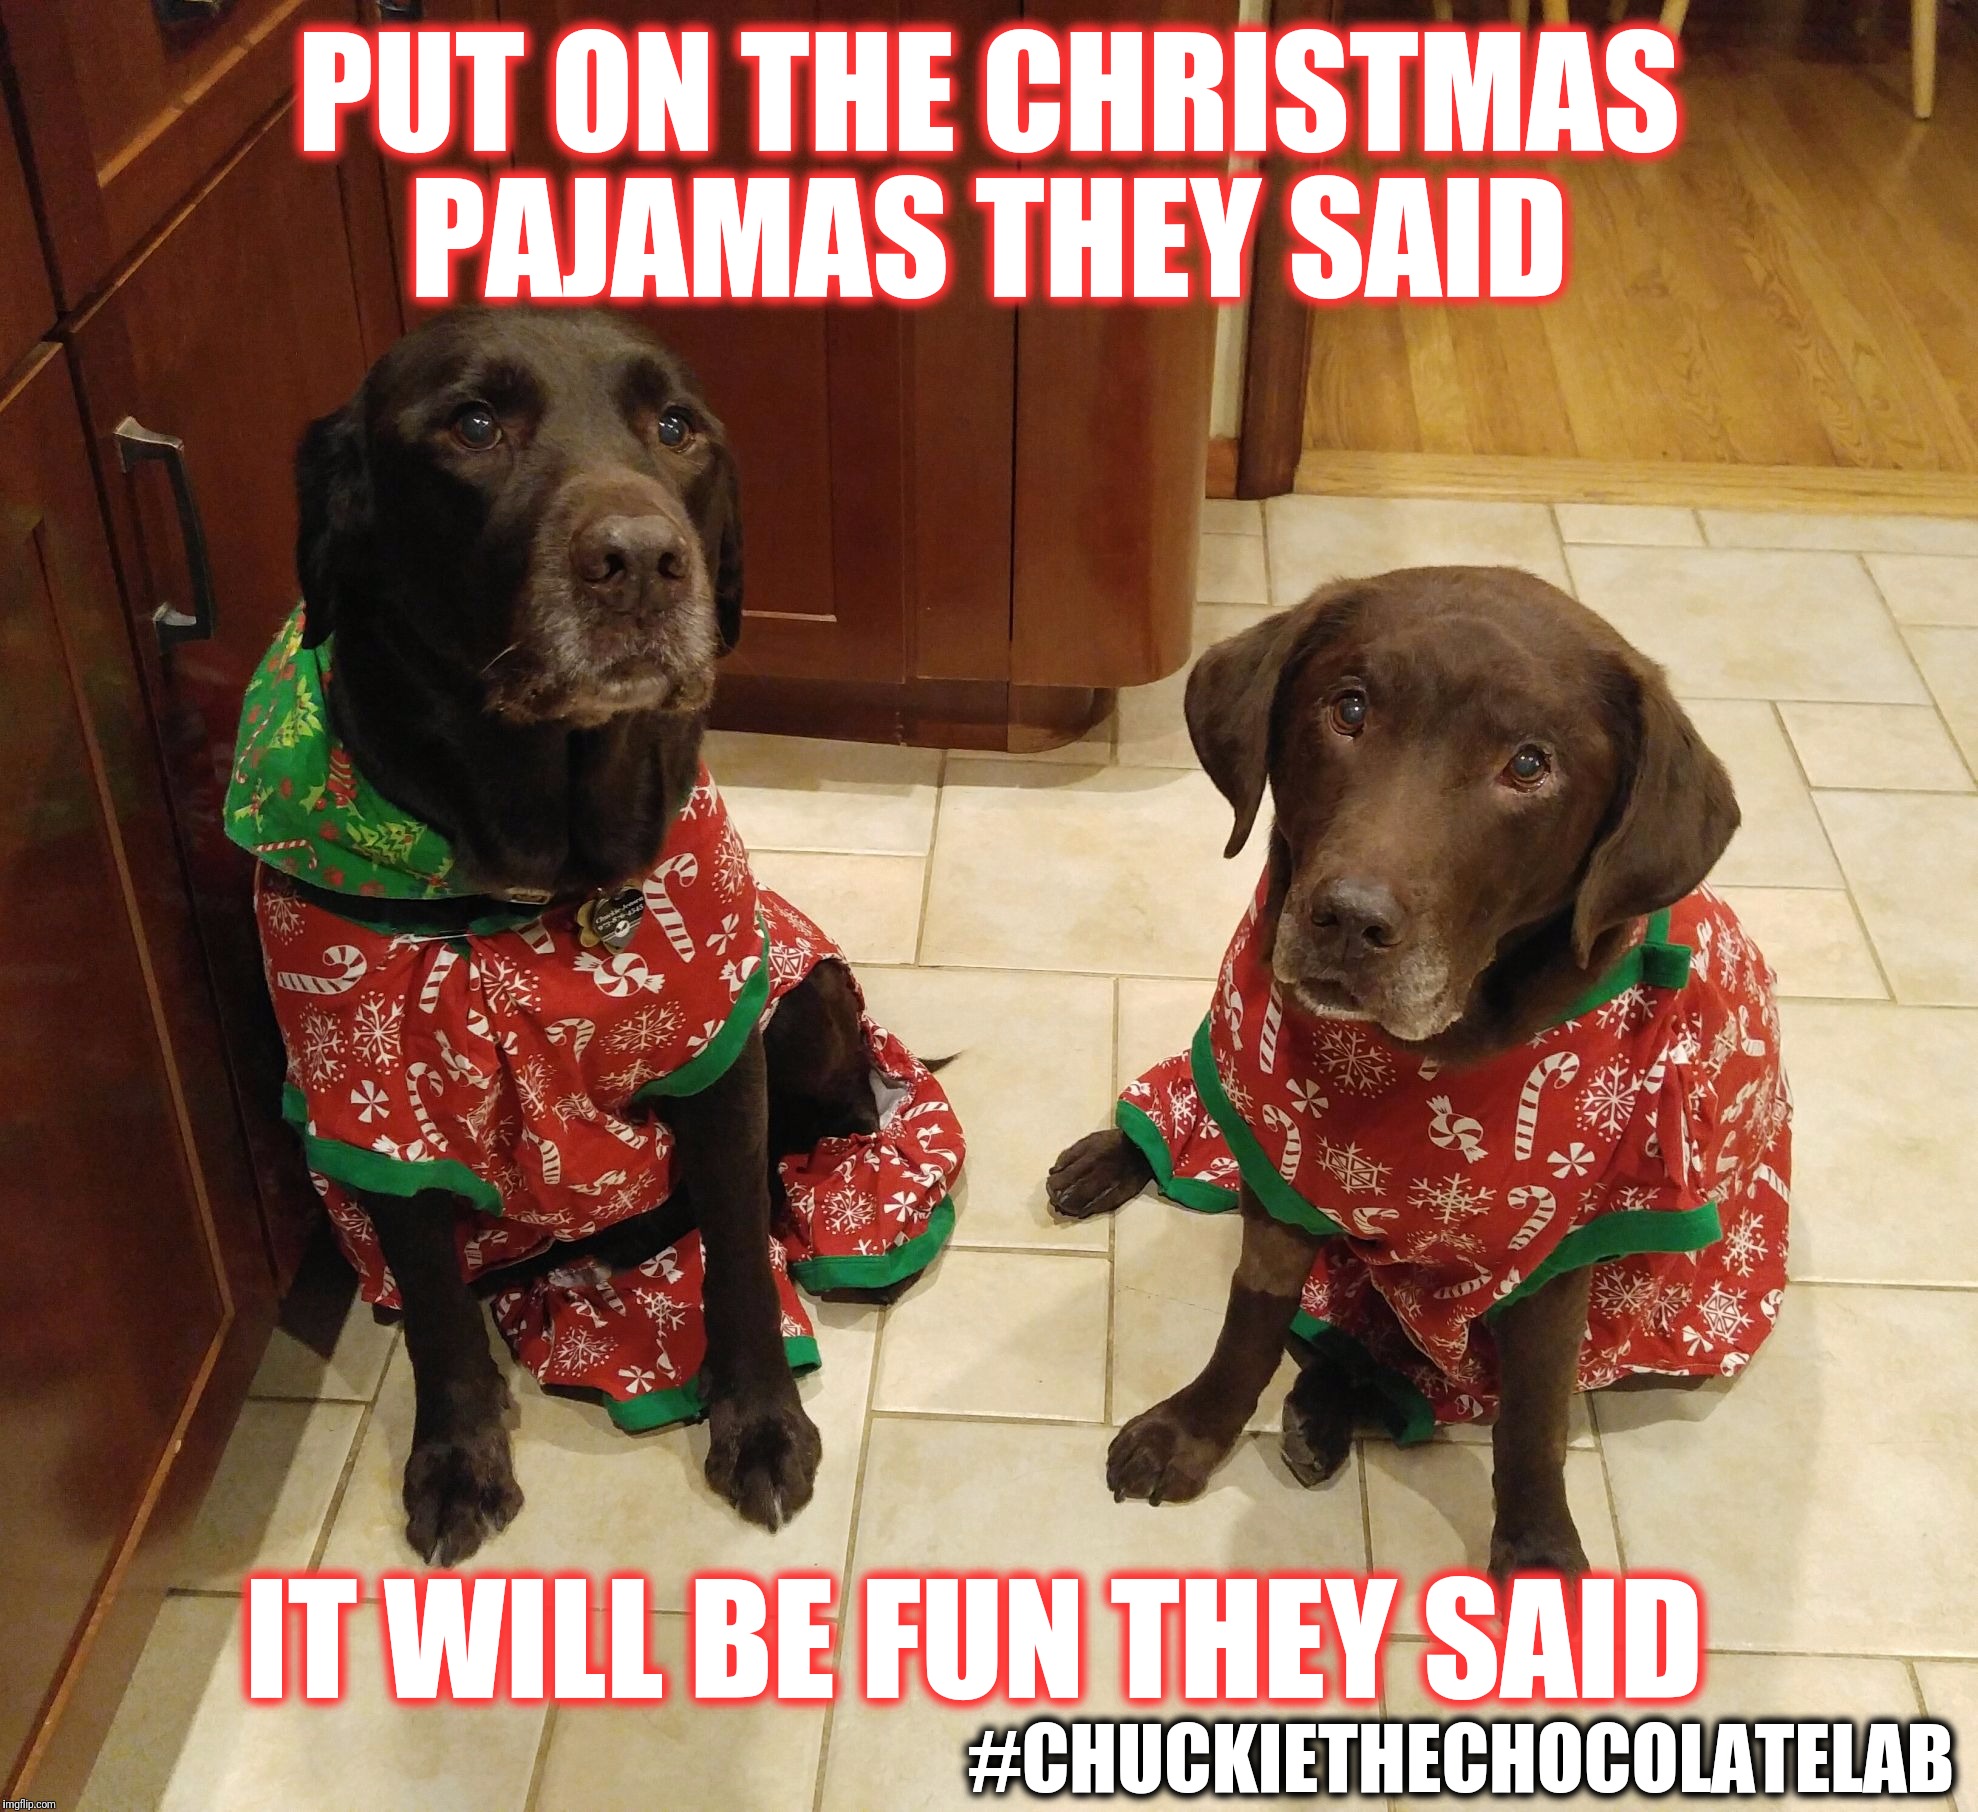 Put on the Christmas pajamas they said it will be fun they said  | PUT ON THE CHRISTMAS PAJAMAS THEY SAID; IT WILL BE FUN THEY SAID; #CHUCKIETHECHOCOLATELAB | image tagged in chuckie the chocolate lab,funny,dogs,christmas,pajamas,funny memes | made w/ Imgflip meme maker